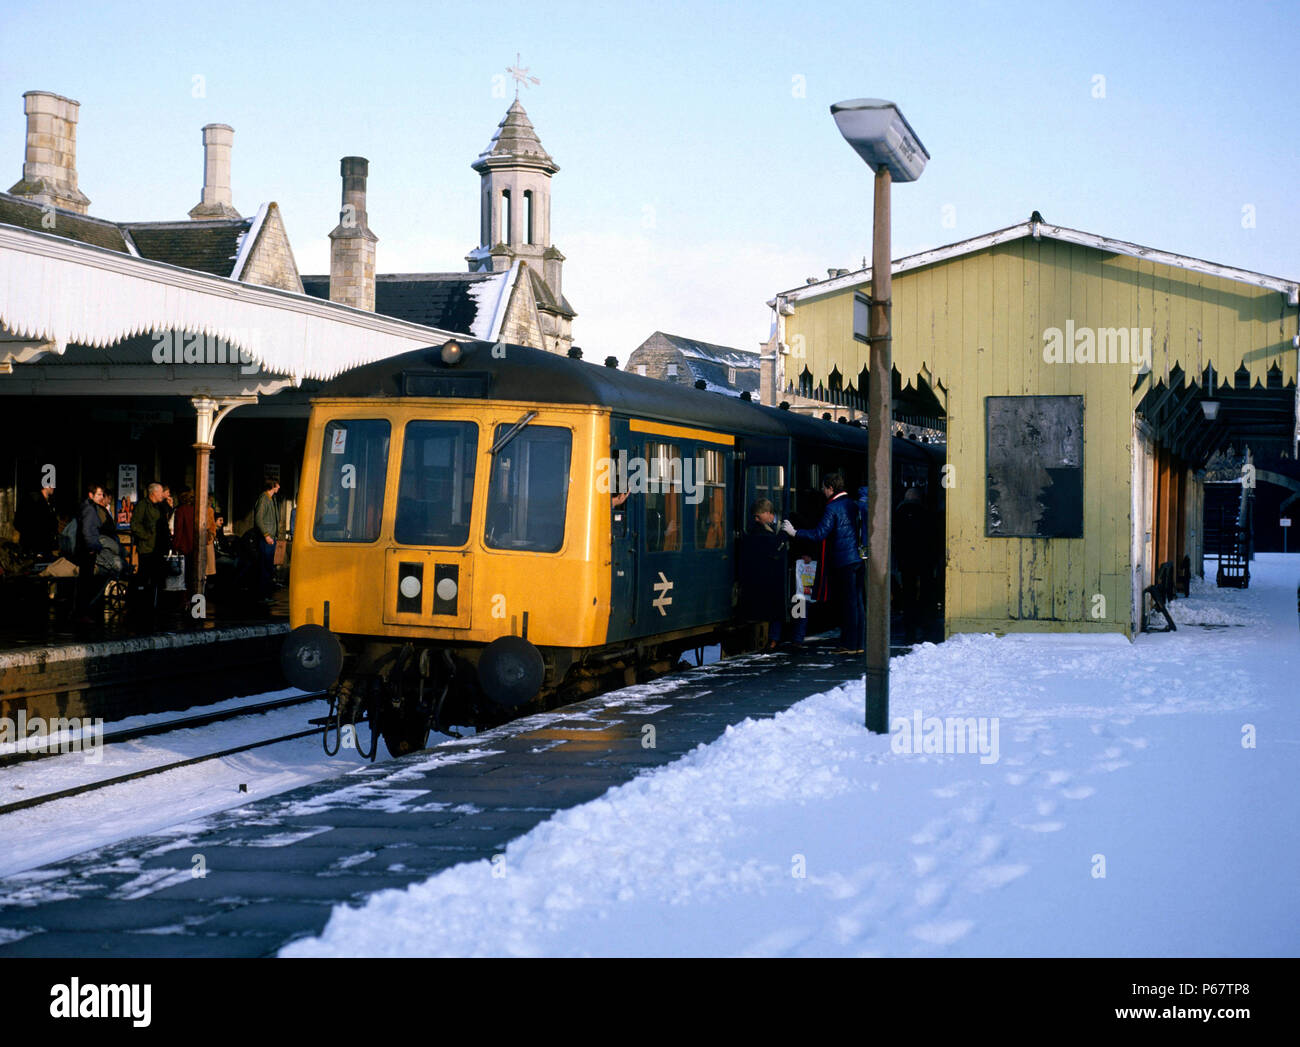 Stamford. The 09:41 ex Norwich failed in the snow between Norwich and Peterborough. Relief D.M.U. for Leicester from Peterborough. 14.12.1981. Stock Photo